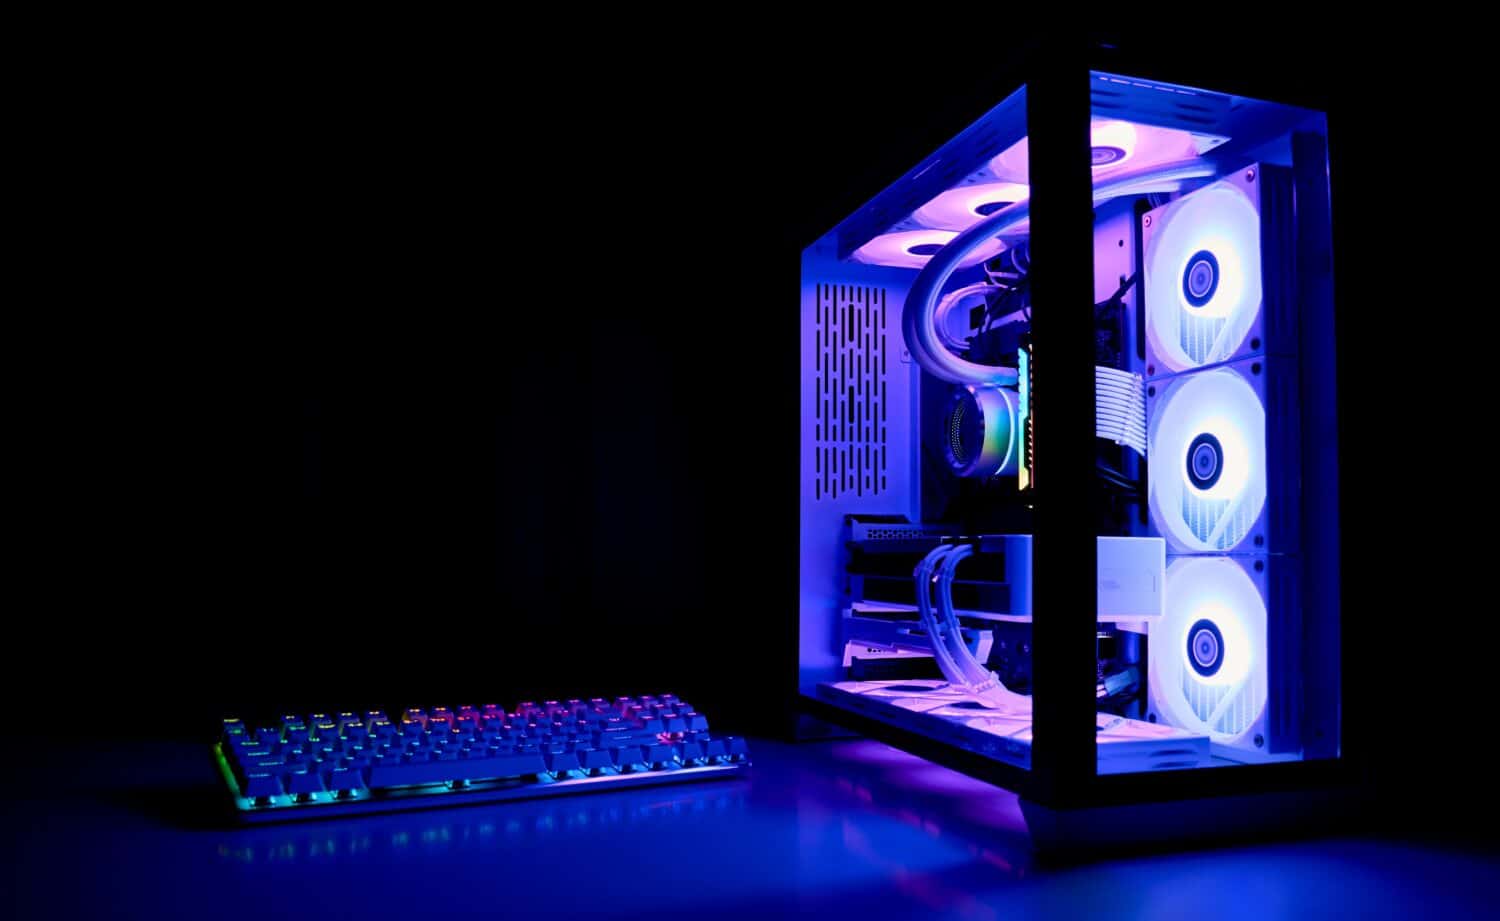 Water Cooled Gaming Pc with RGB rainbow LED lighting. Modern gaming computer with a keyboard in a dark room. Water Liquid Cooling Computer